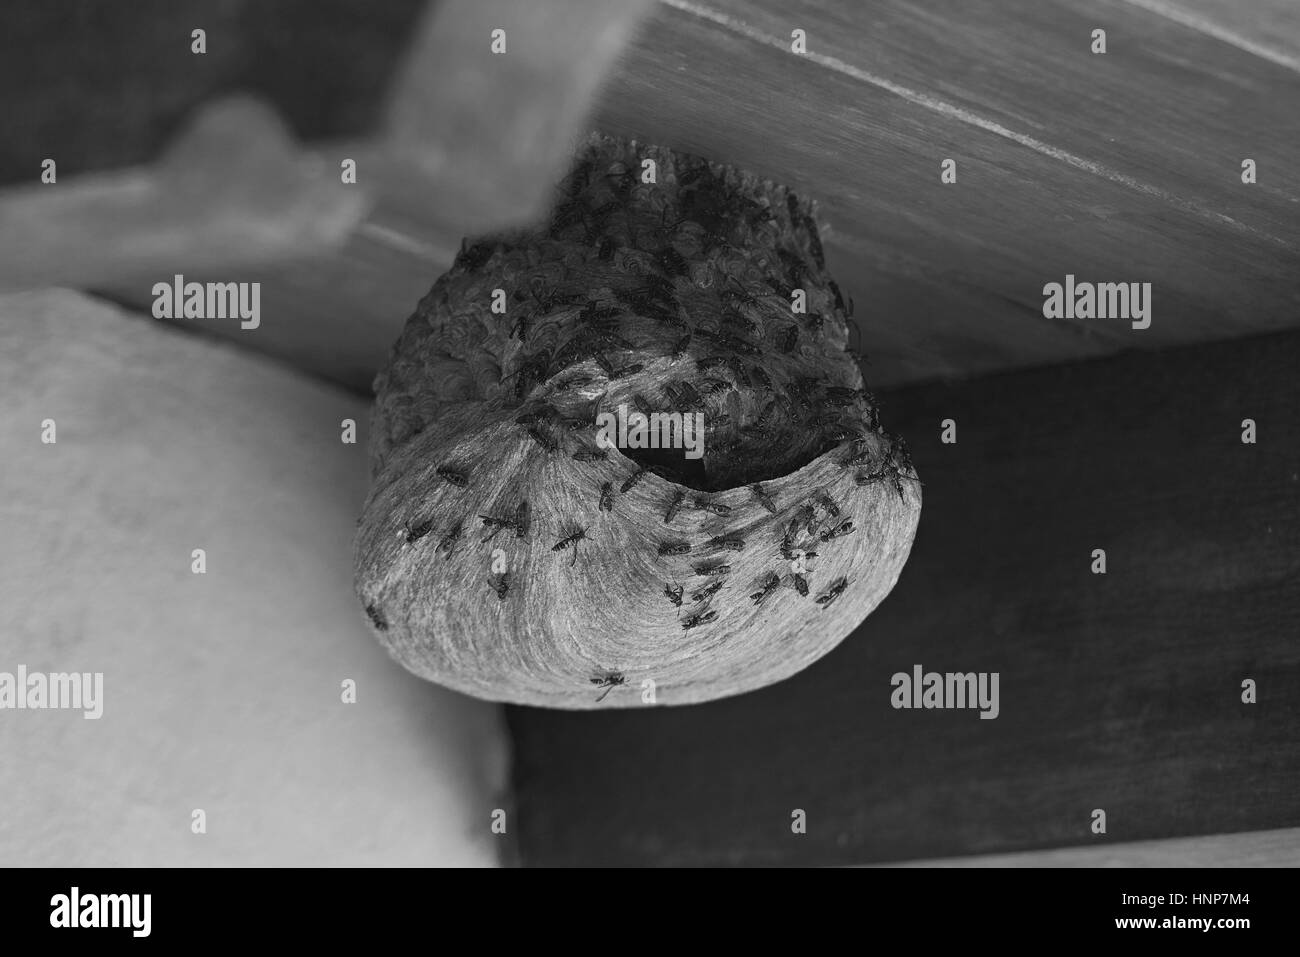 Wasps wild nest on home house roof in black and white colors Stock Photo